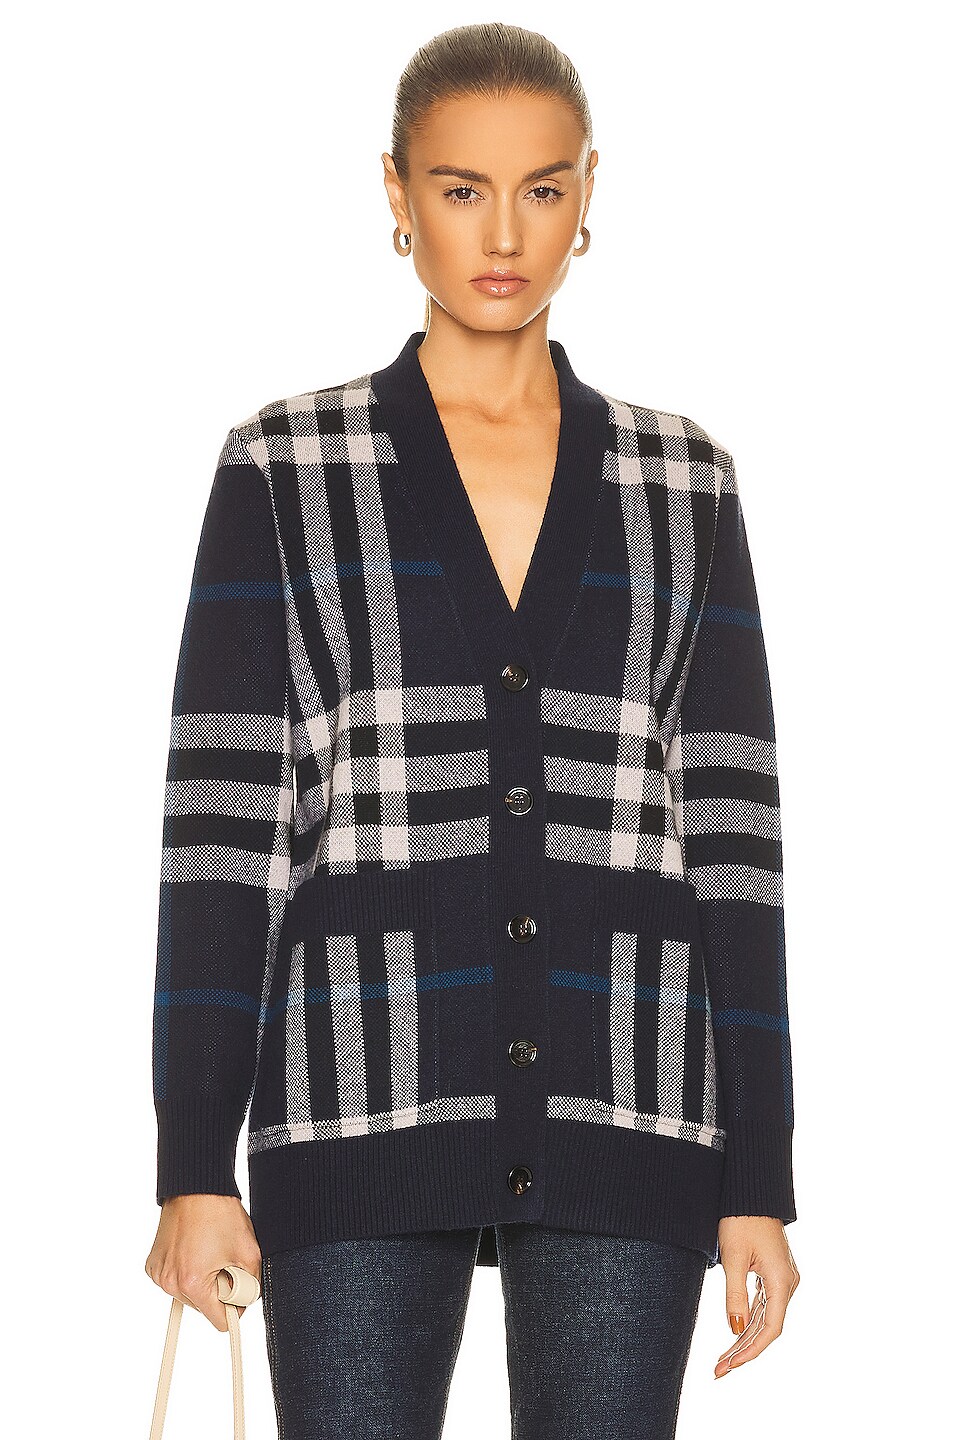 Burberry Willah Check Oversize Cardigan in Dark Charcoal Blue | FWRD